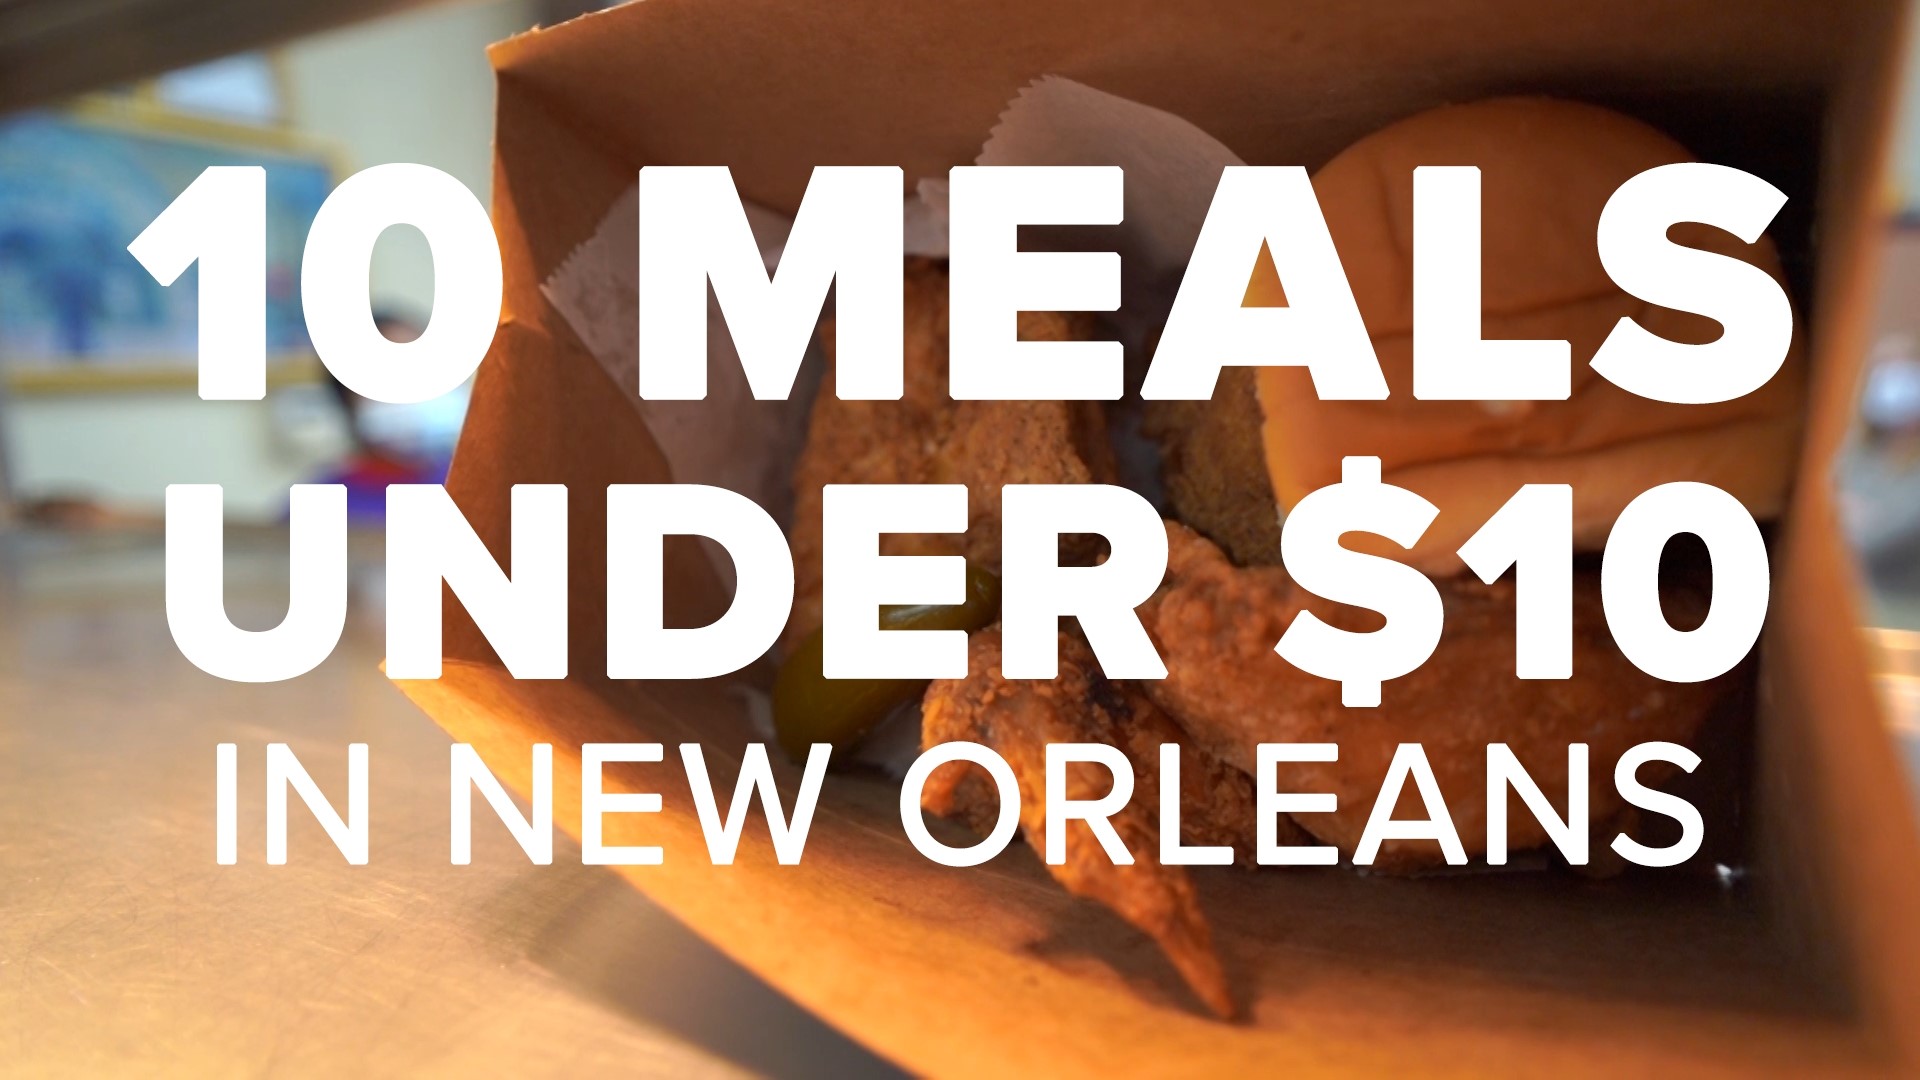 10 full meals for $10 in New Orleans